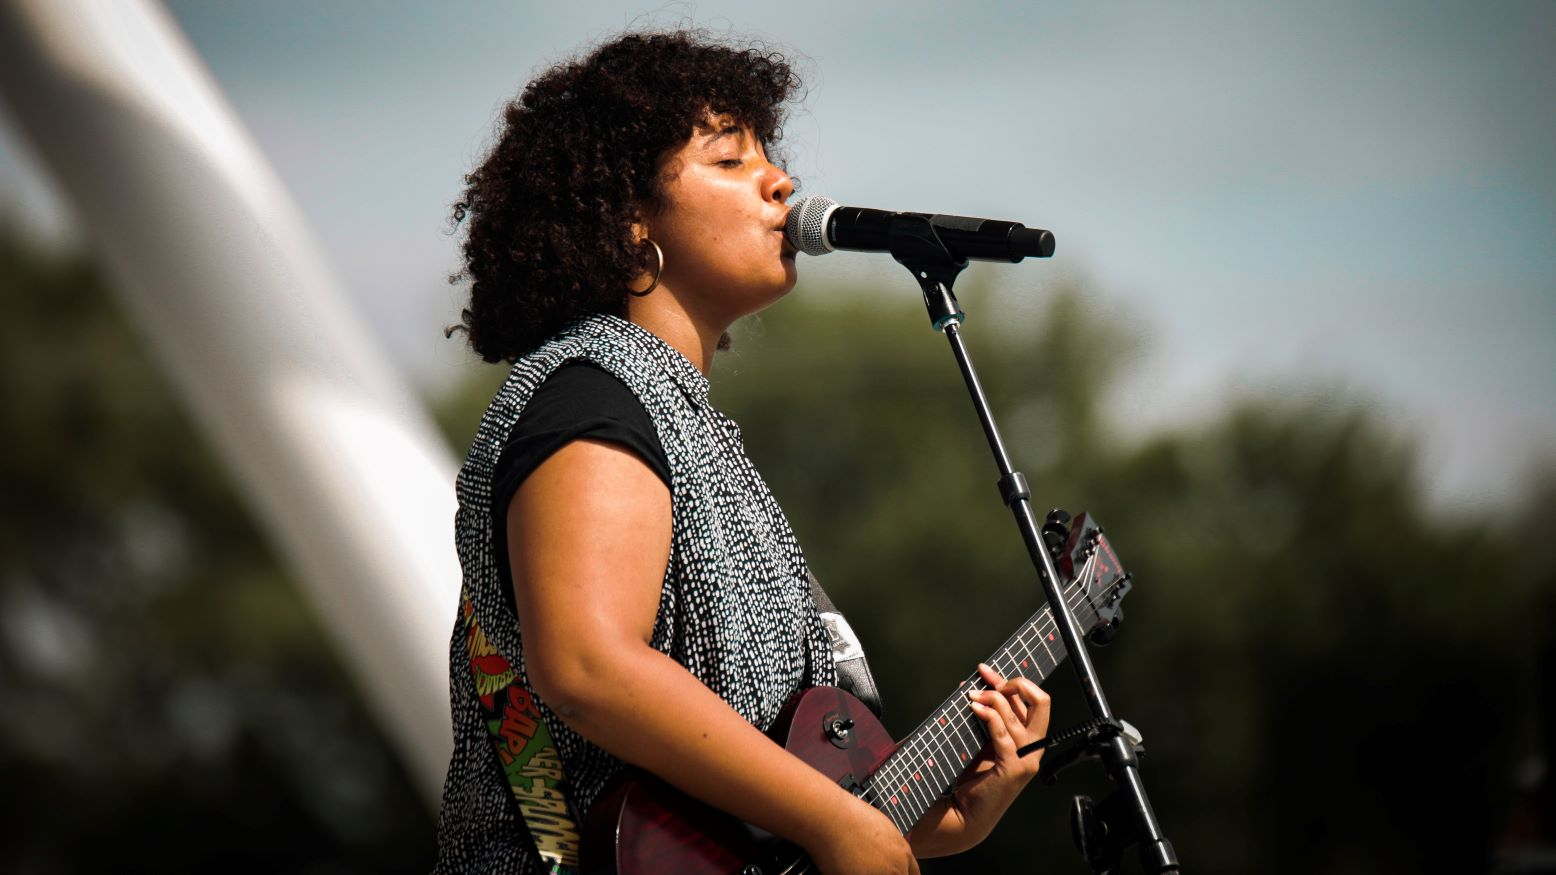 Musician Charlotte Blu, a young Black woman, plays guitar and sings into a microphone as she performs at an outdoor venue. 